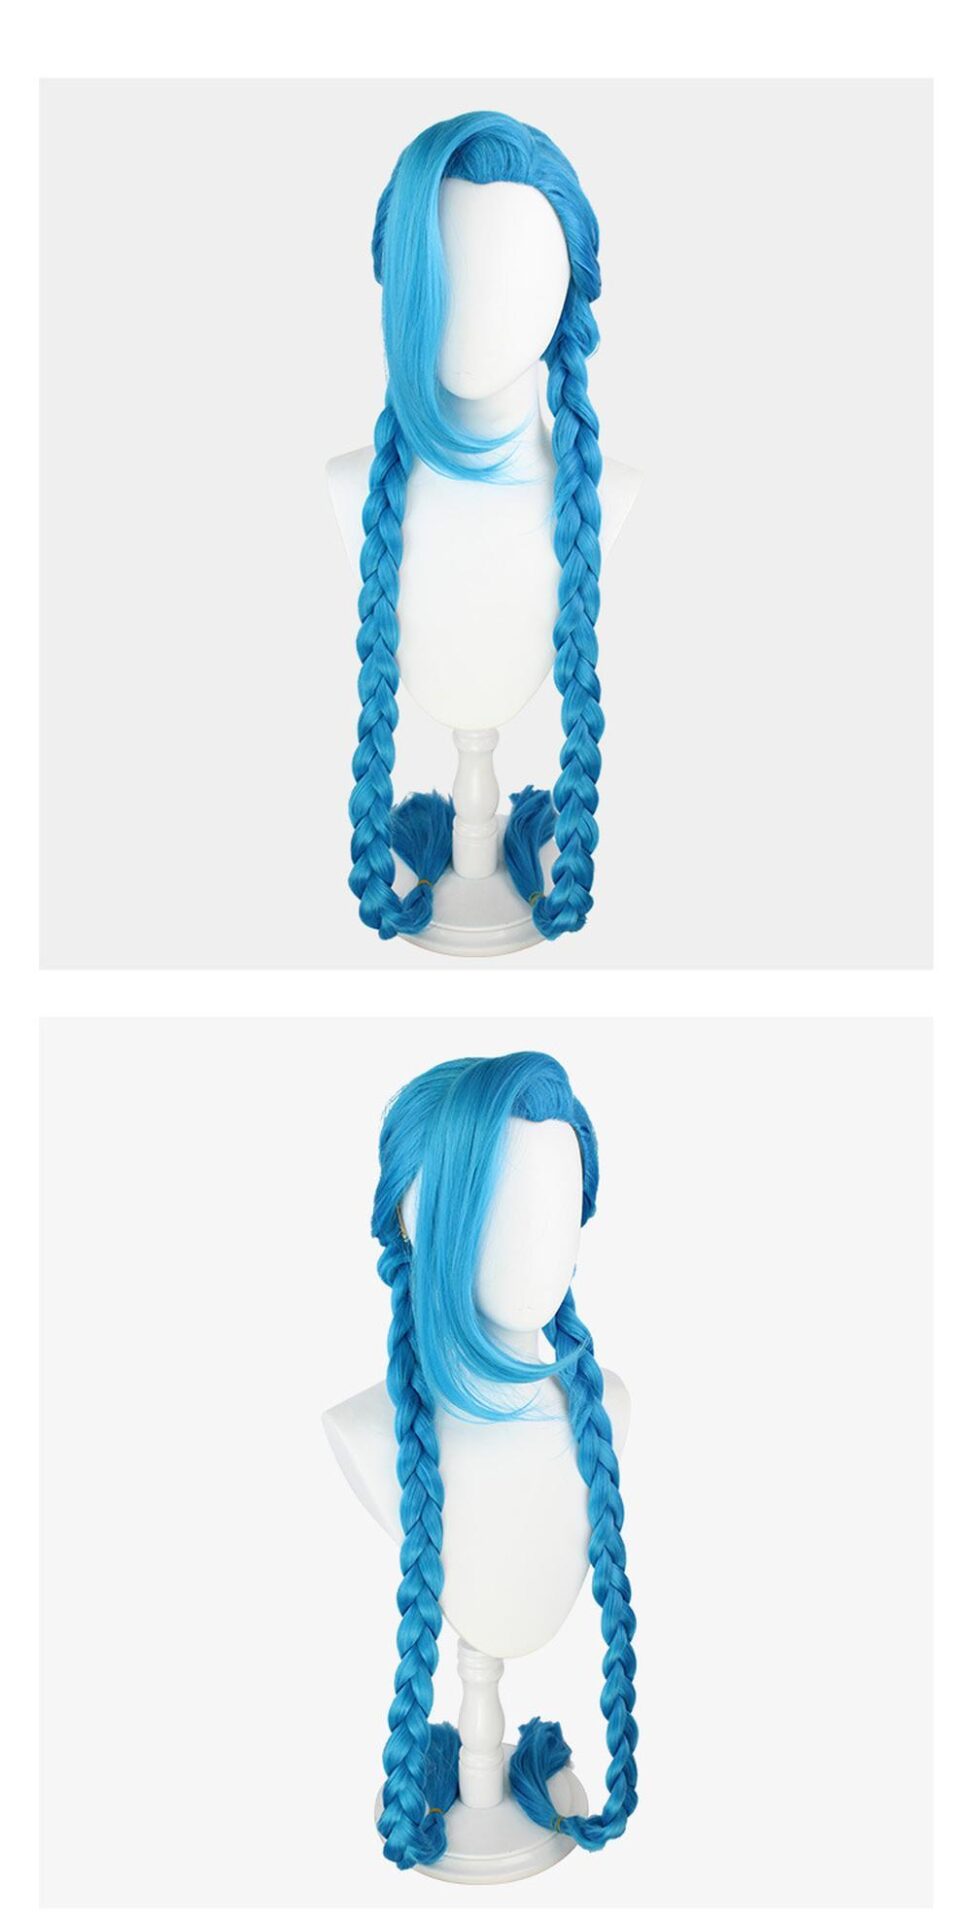 cosplayspa cosplayspa Jinx League of Legends Wig Blue Braided Pigtail for Gamers 4FU5FZ